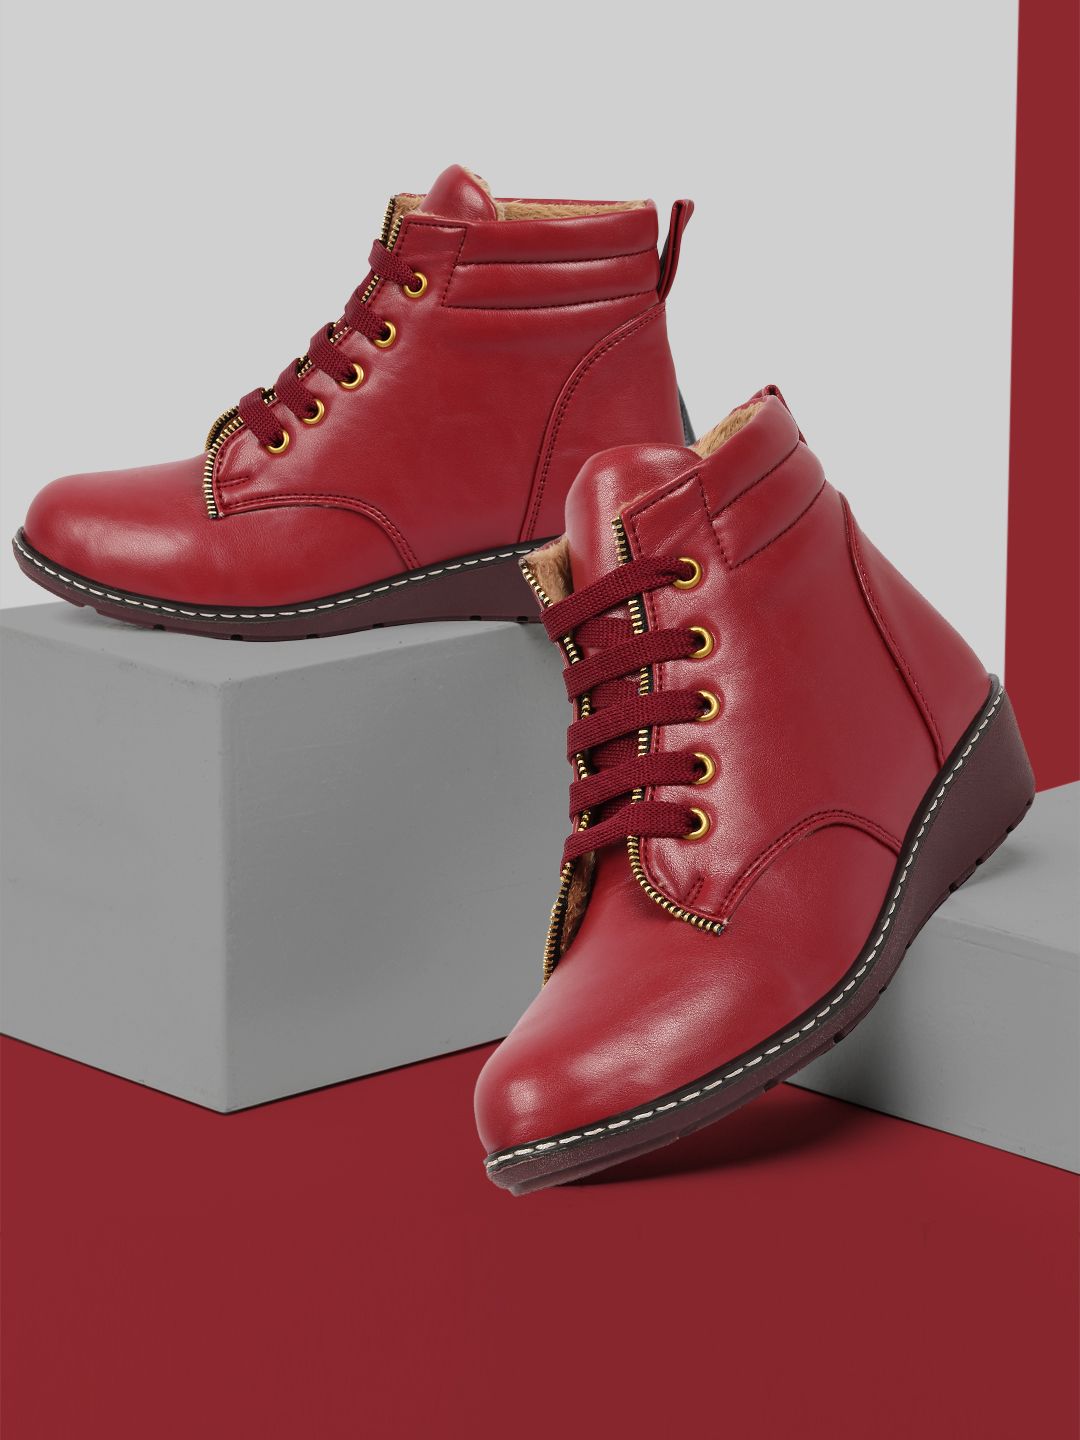 ZAPATOZ Red PU Block Heeled Boots Price in India